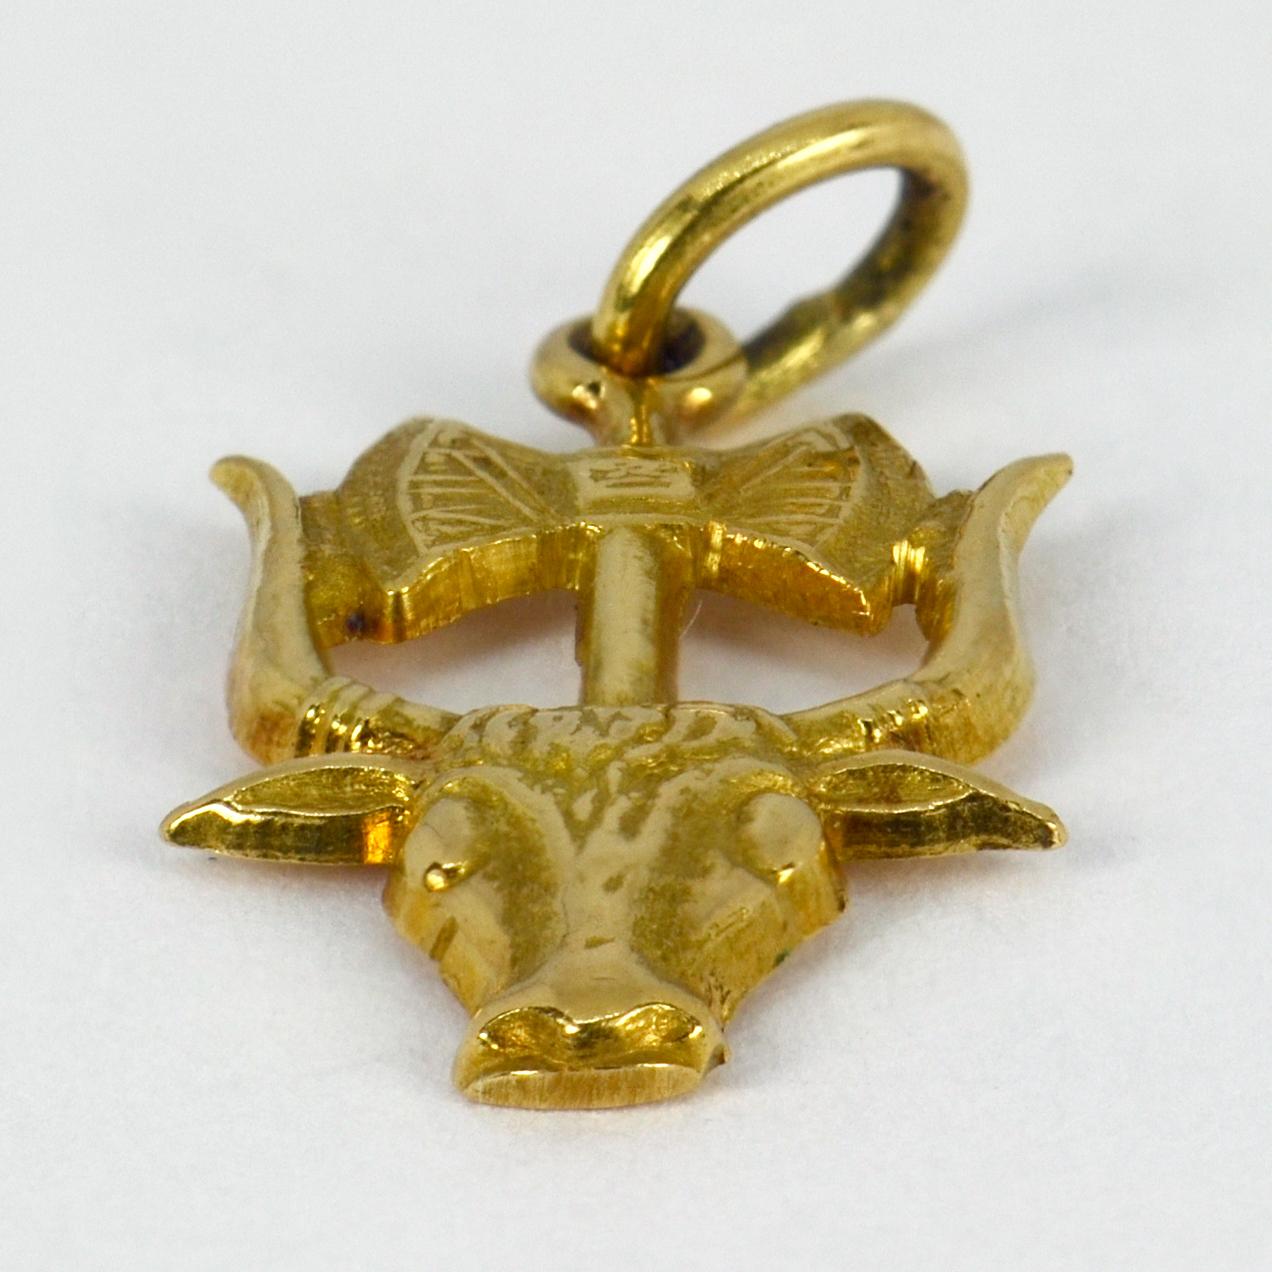 A 9 karat (9K) yellow gold charm pendant designed as the Minoan symbols of the bull and double headed axe (the Labrys). Stamped 750 for 18 karat gold and numbered A68. 

Dimensions: 2 x 1.2 x 0.15 cm (not including jump ring)
Weight: 1.64 grams
